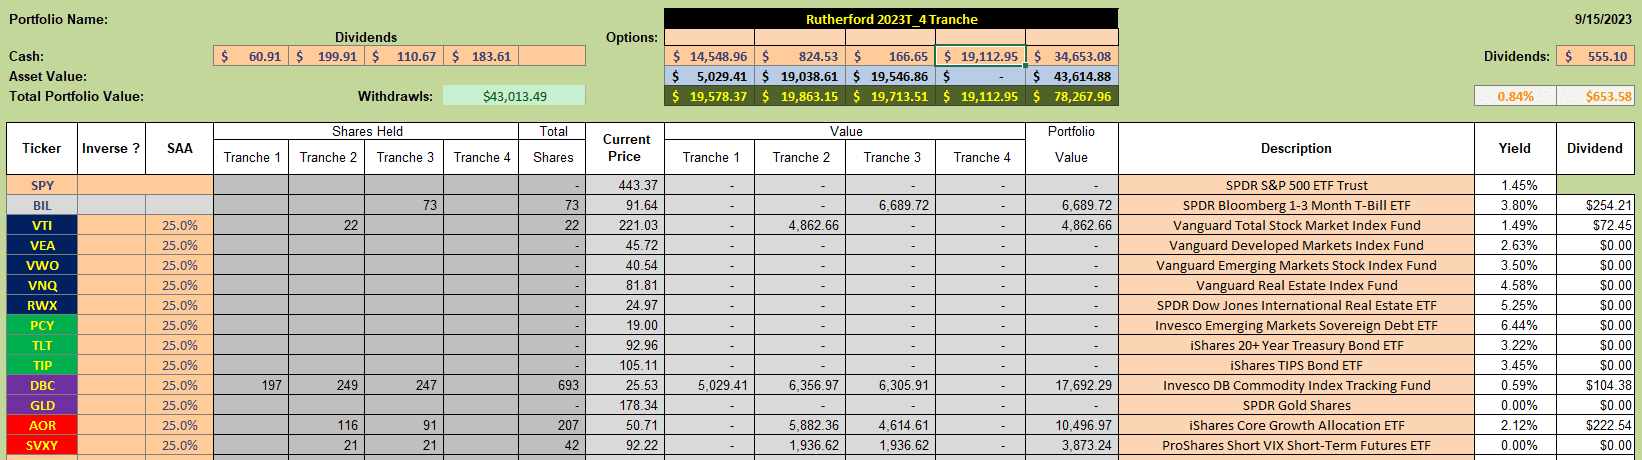 Rutherford Portfolio Review (Tranche 4): 15 September 2023 4